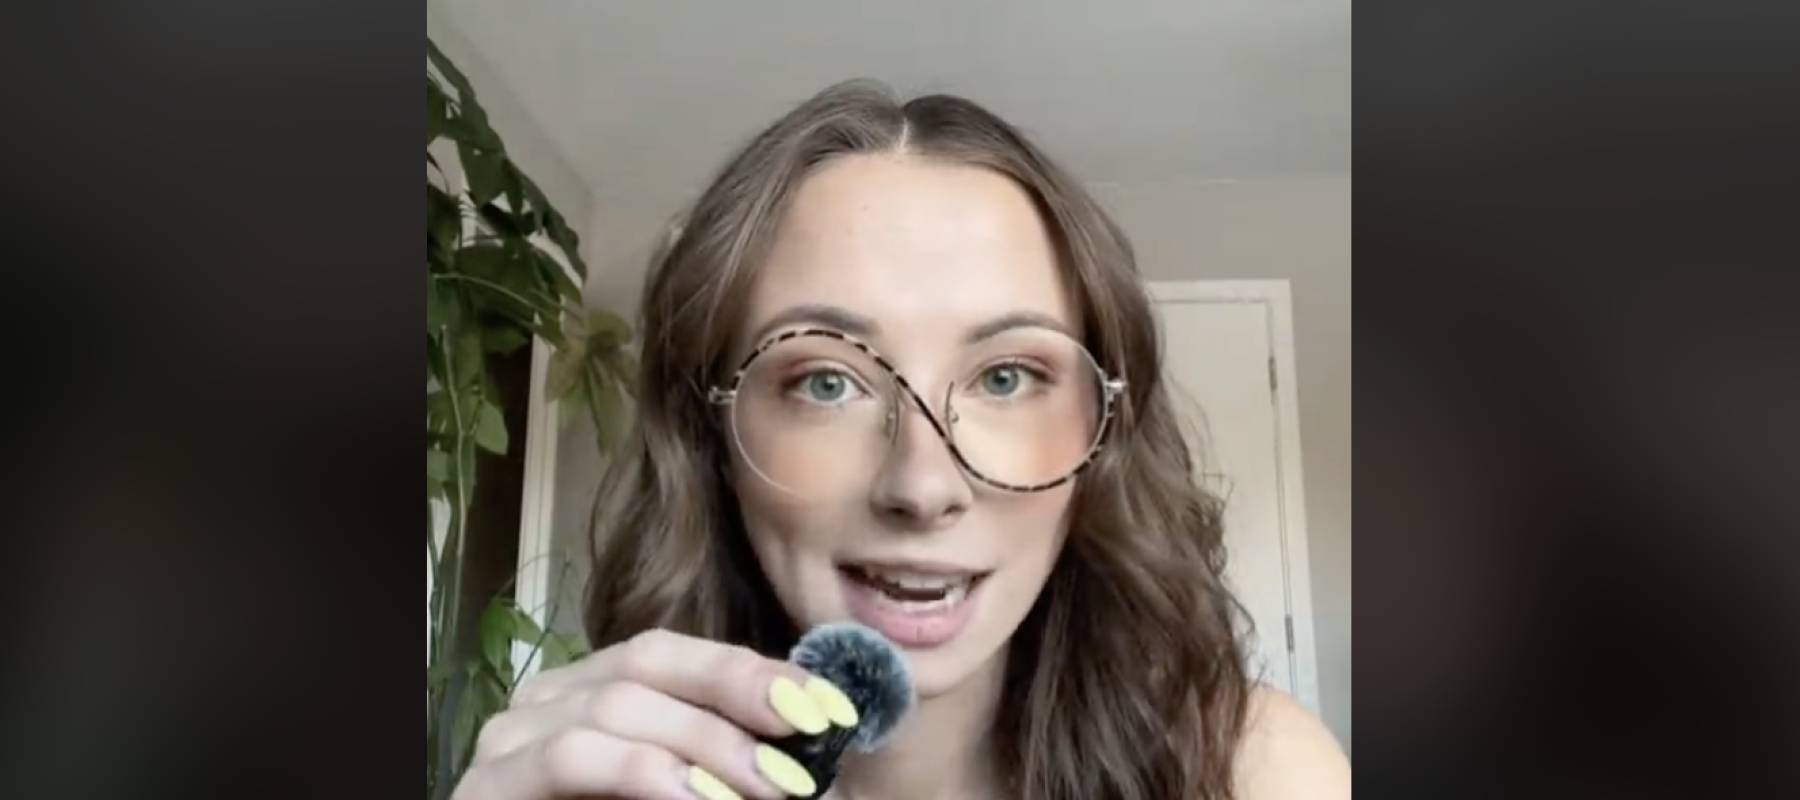 TikToker Gabrielle Judge in a screengrab from her viral video